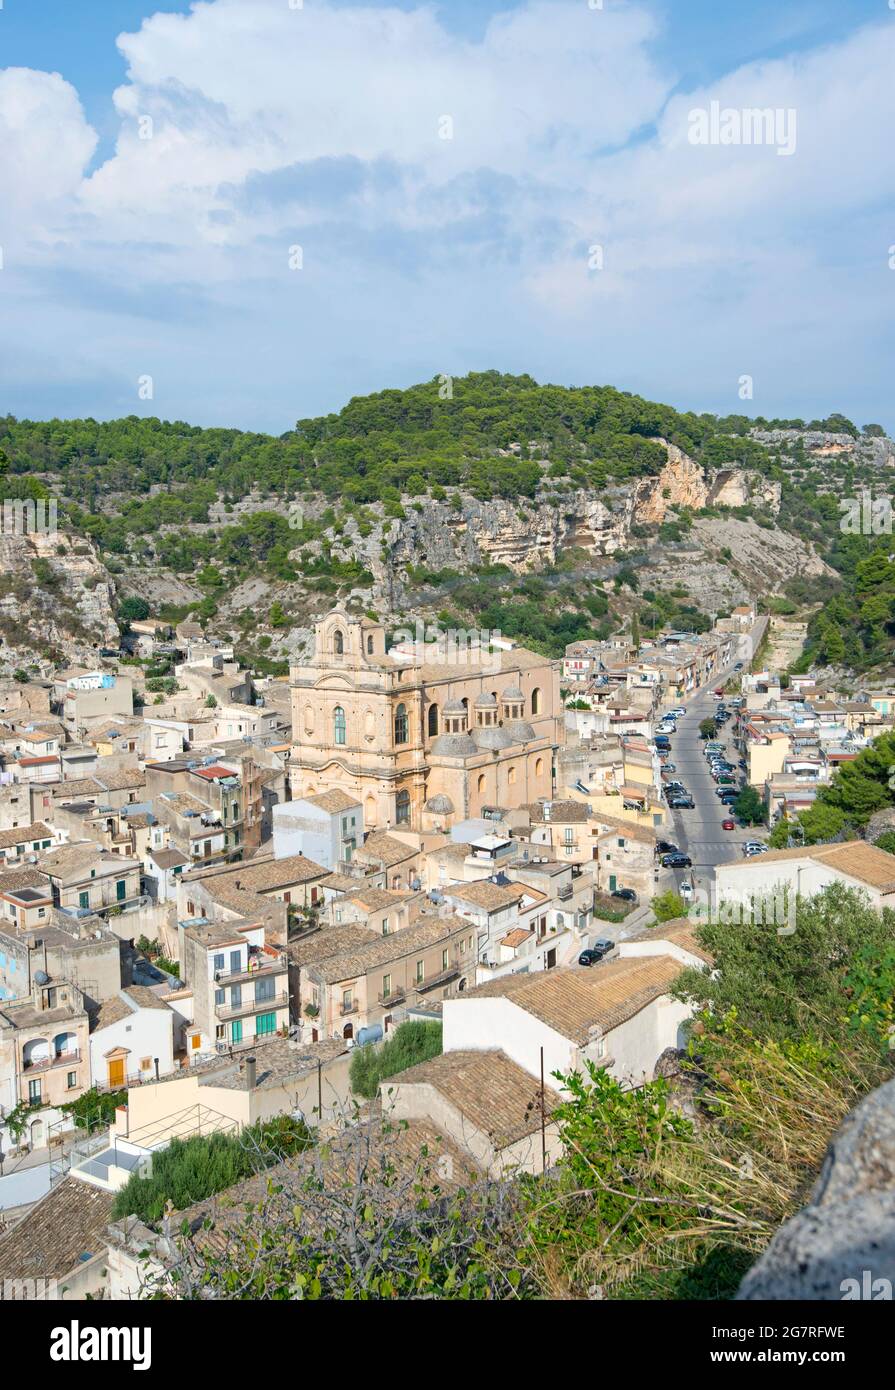 Beautiful View of Scicli, Ragusa, Sicily, Italy, Europe, World Heritage Site Stock Photo